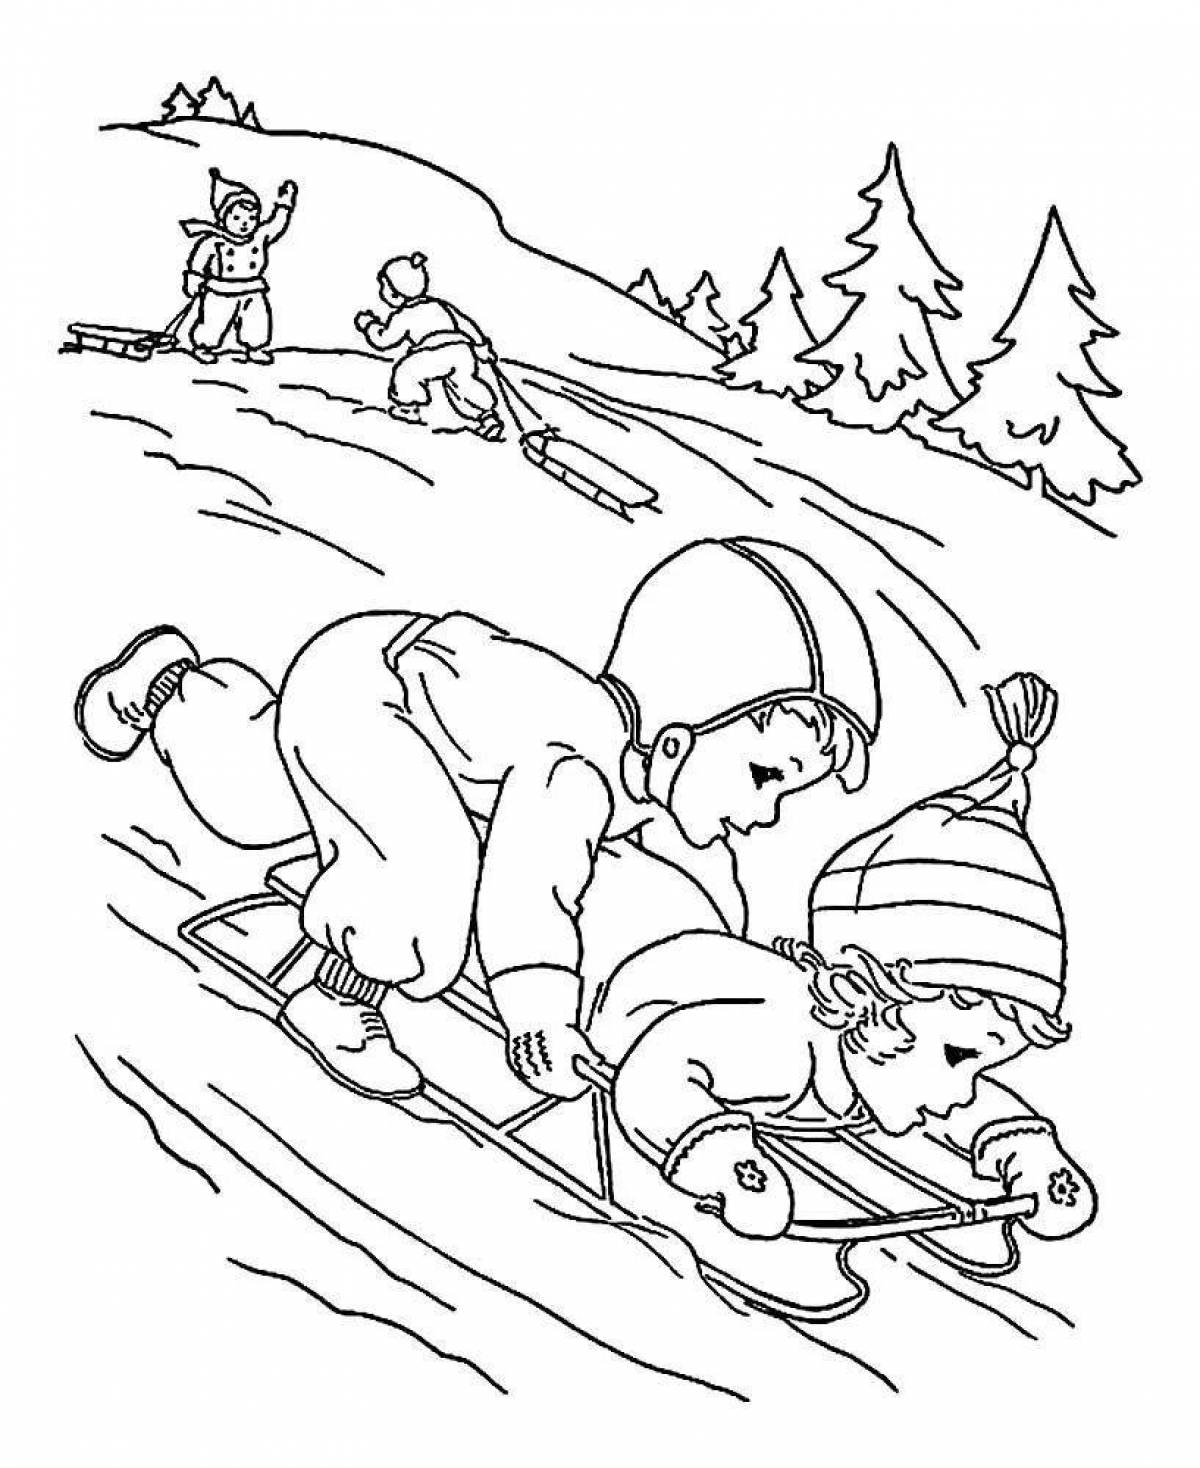 Coloring page of a jubilant child on a sled